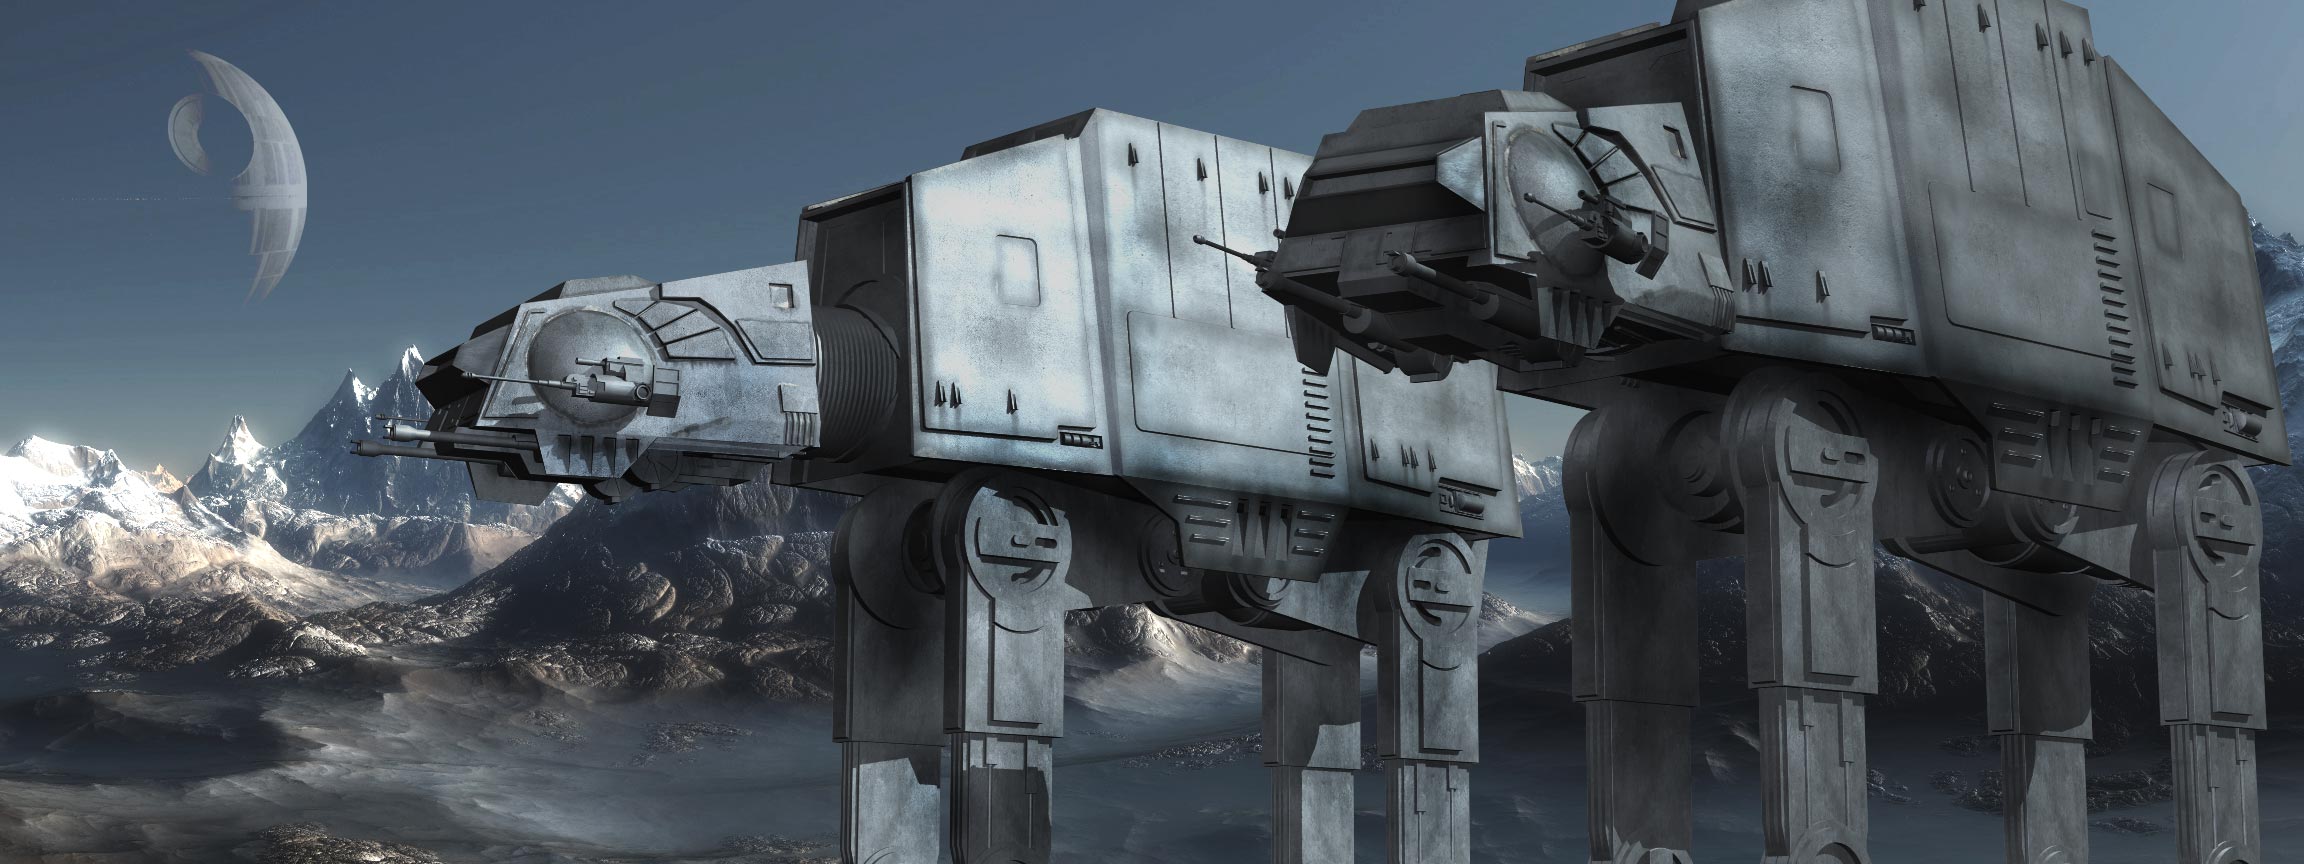 2304 864 AT AT Imperial Walker Wallpaper So this is what Im